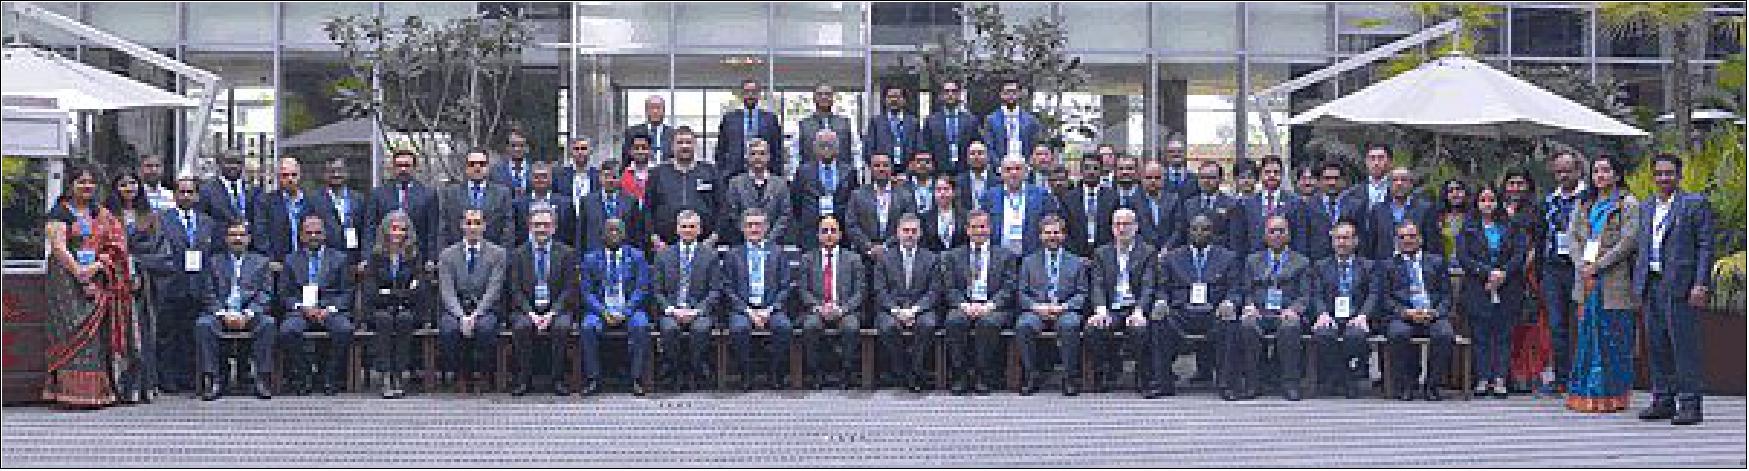 Figure 2: The approximately 50-strong 36th Satellite-based Augmentation Systems Interoperability Working Group (SBAS IWG) at Delhi in February 2020, hosted by the Airport Authority of India (photo credit: ESA)